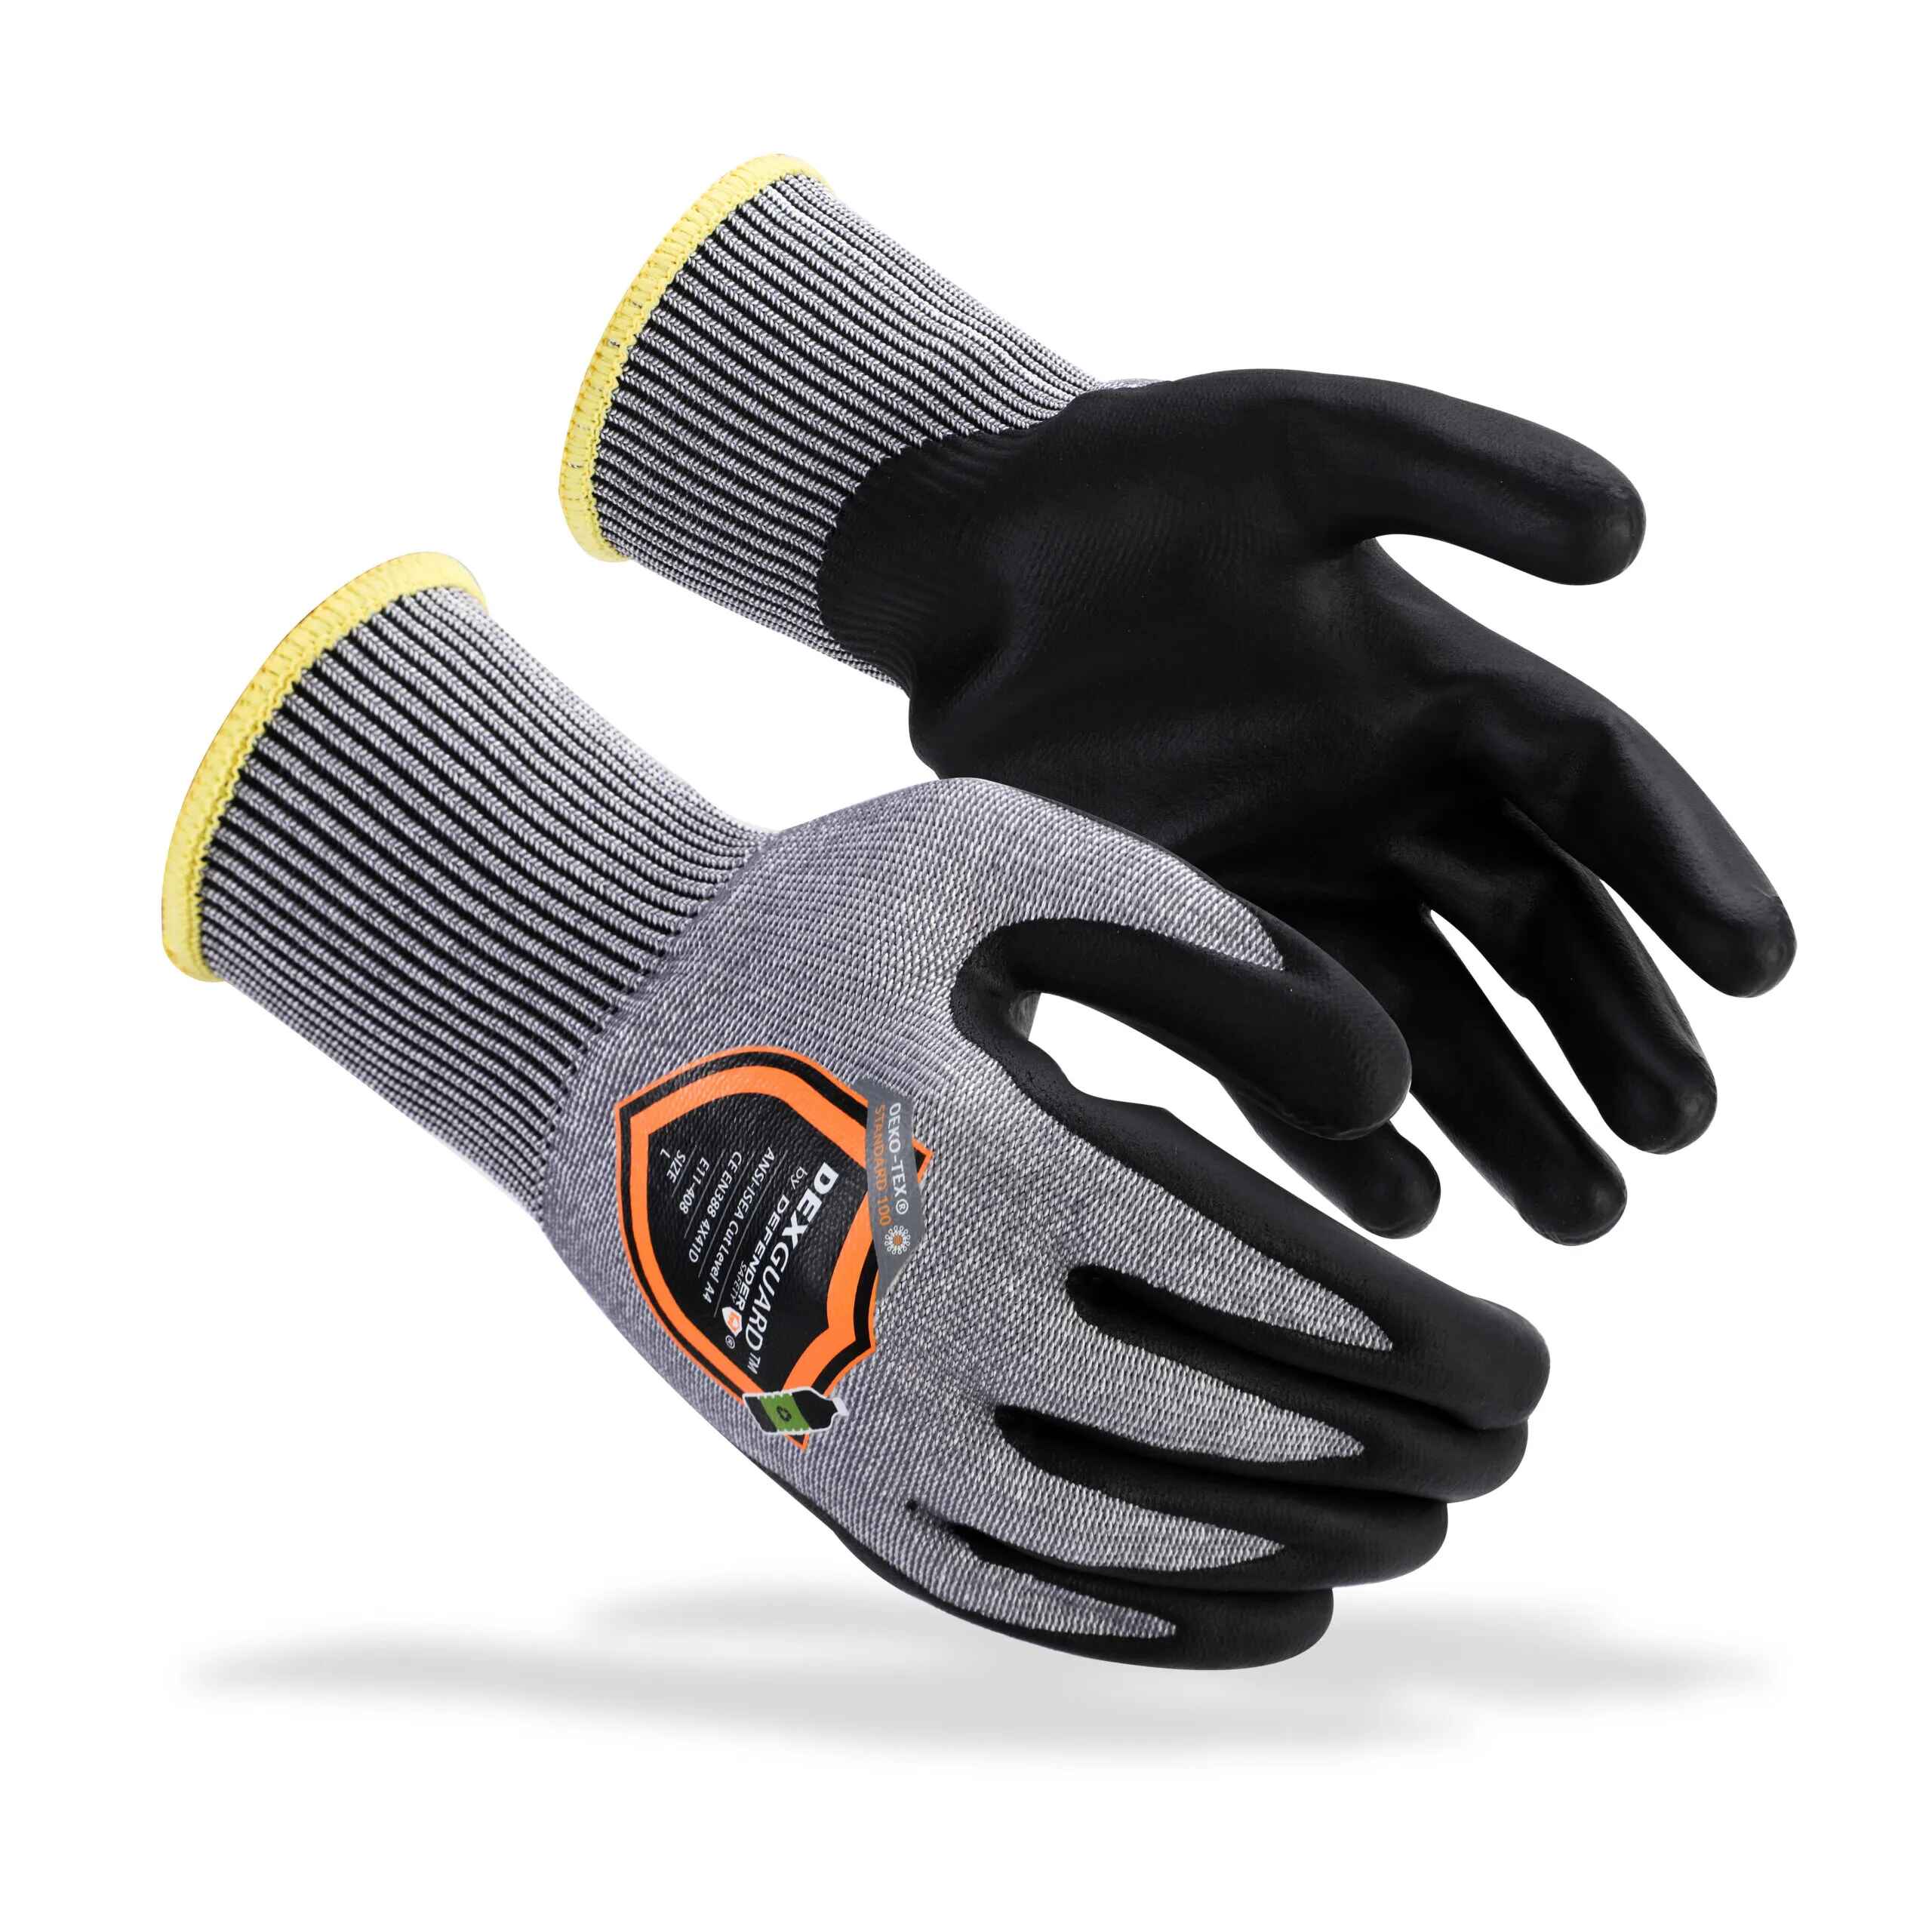 DEXGUARD™ A5 Cut Gloves, Cold Weather Thermal Liner, Water Resistant